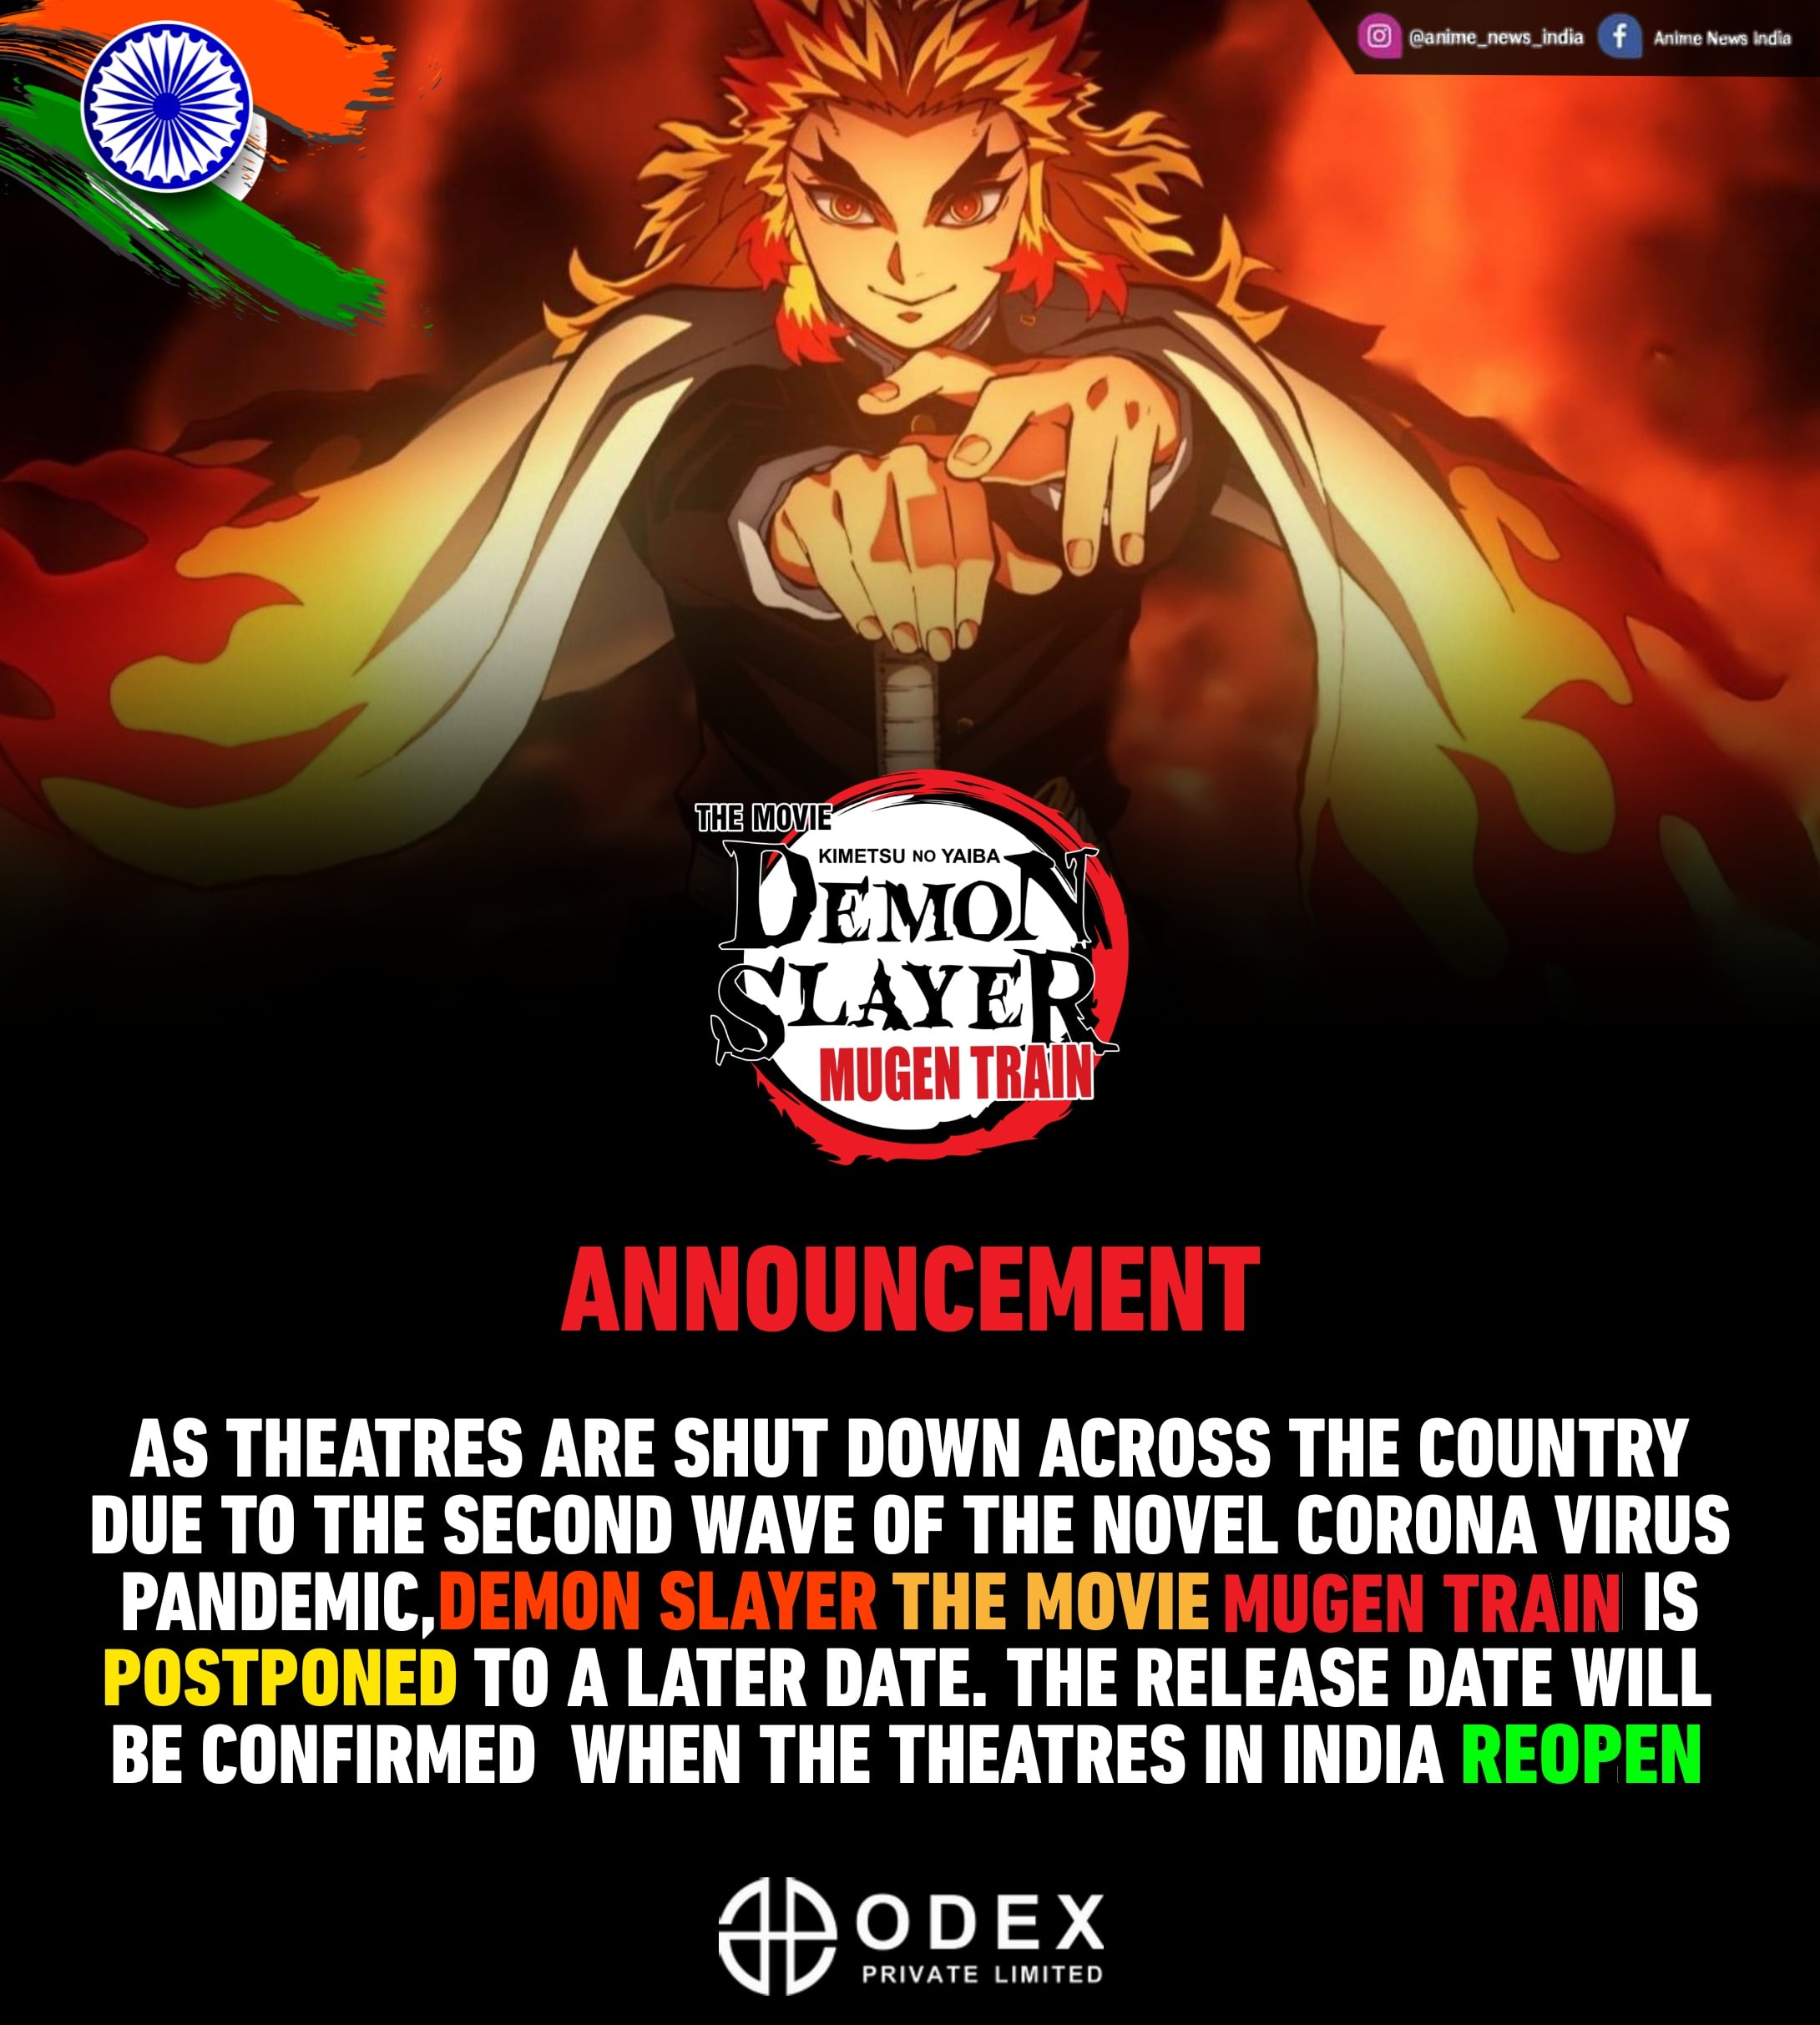 The Release Date Of Demon Slayer The Movie Mugen Train Got Postponed In India - Anime News India